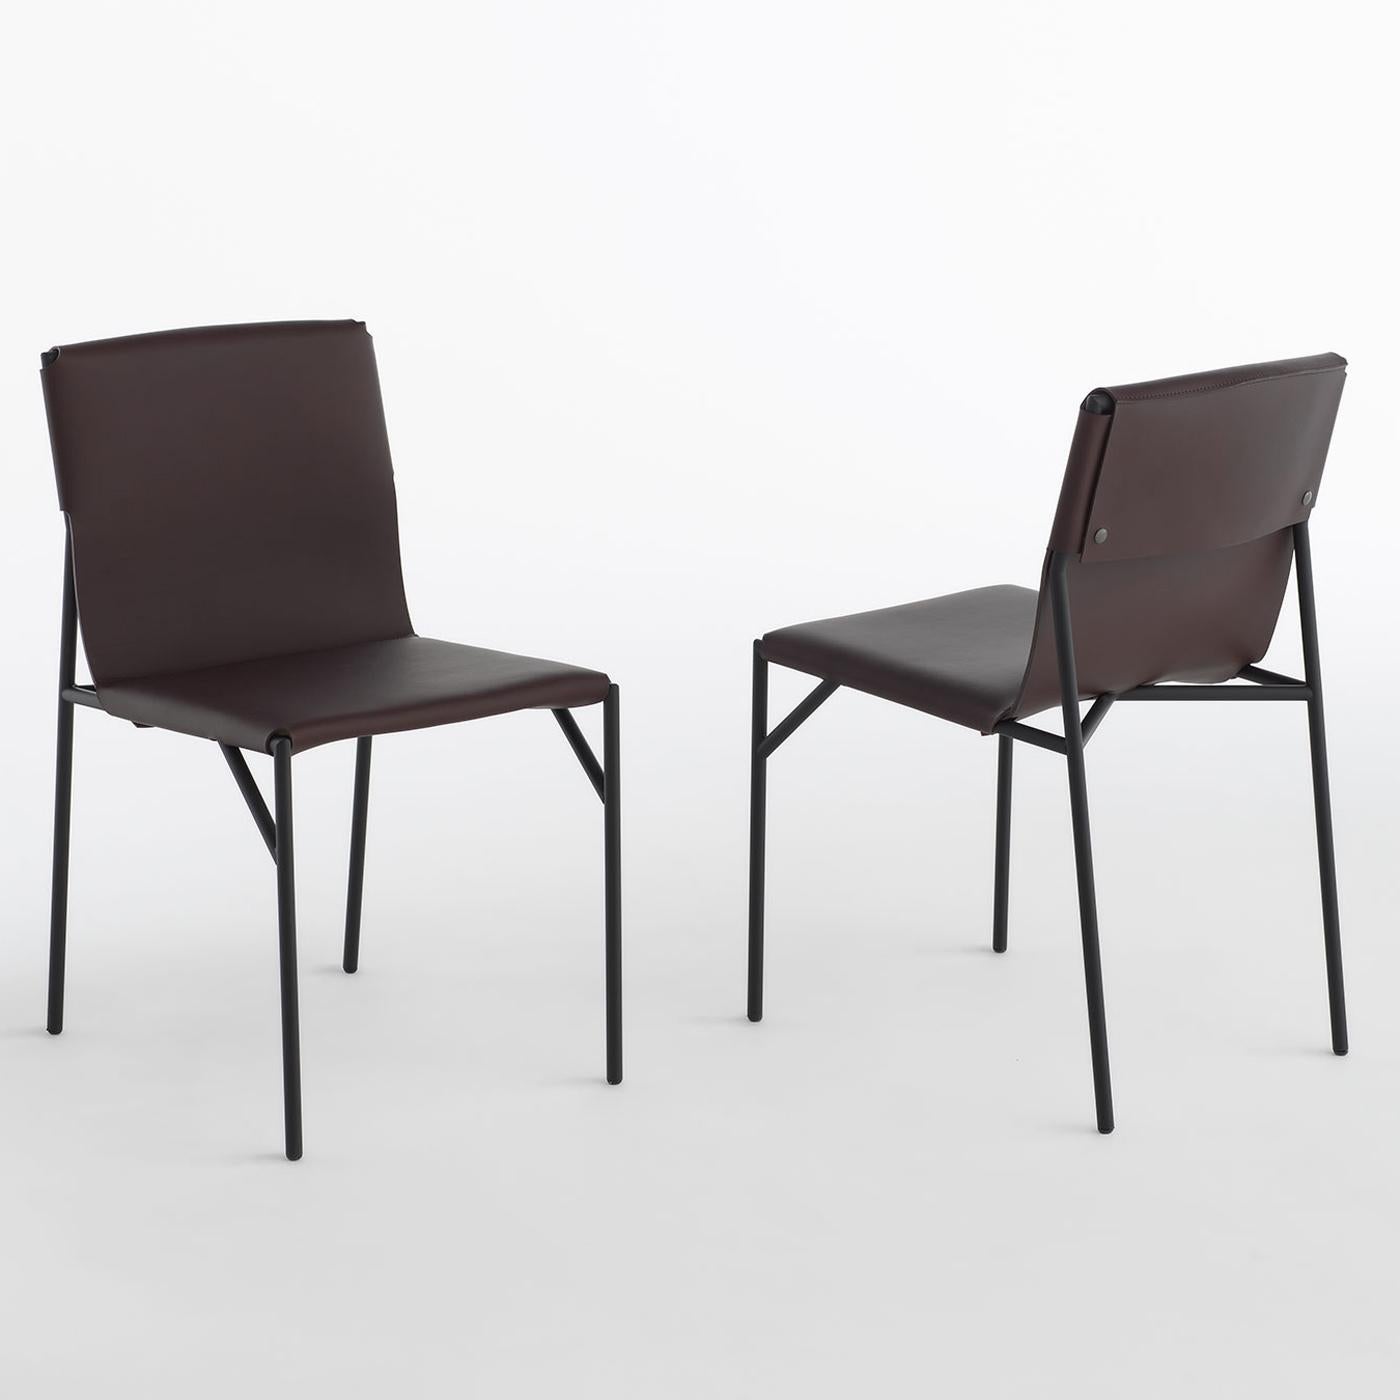 Minimalism and elegance are distinctive features of this versatile piece of functional decor. Boasting a modern silhouette, this chair is exquisitely designed by Marc Thorpe with a slim yet robust metal structure finished in matte black. The